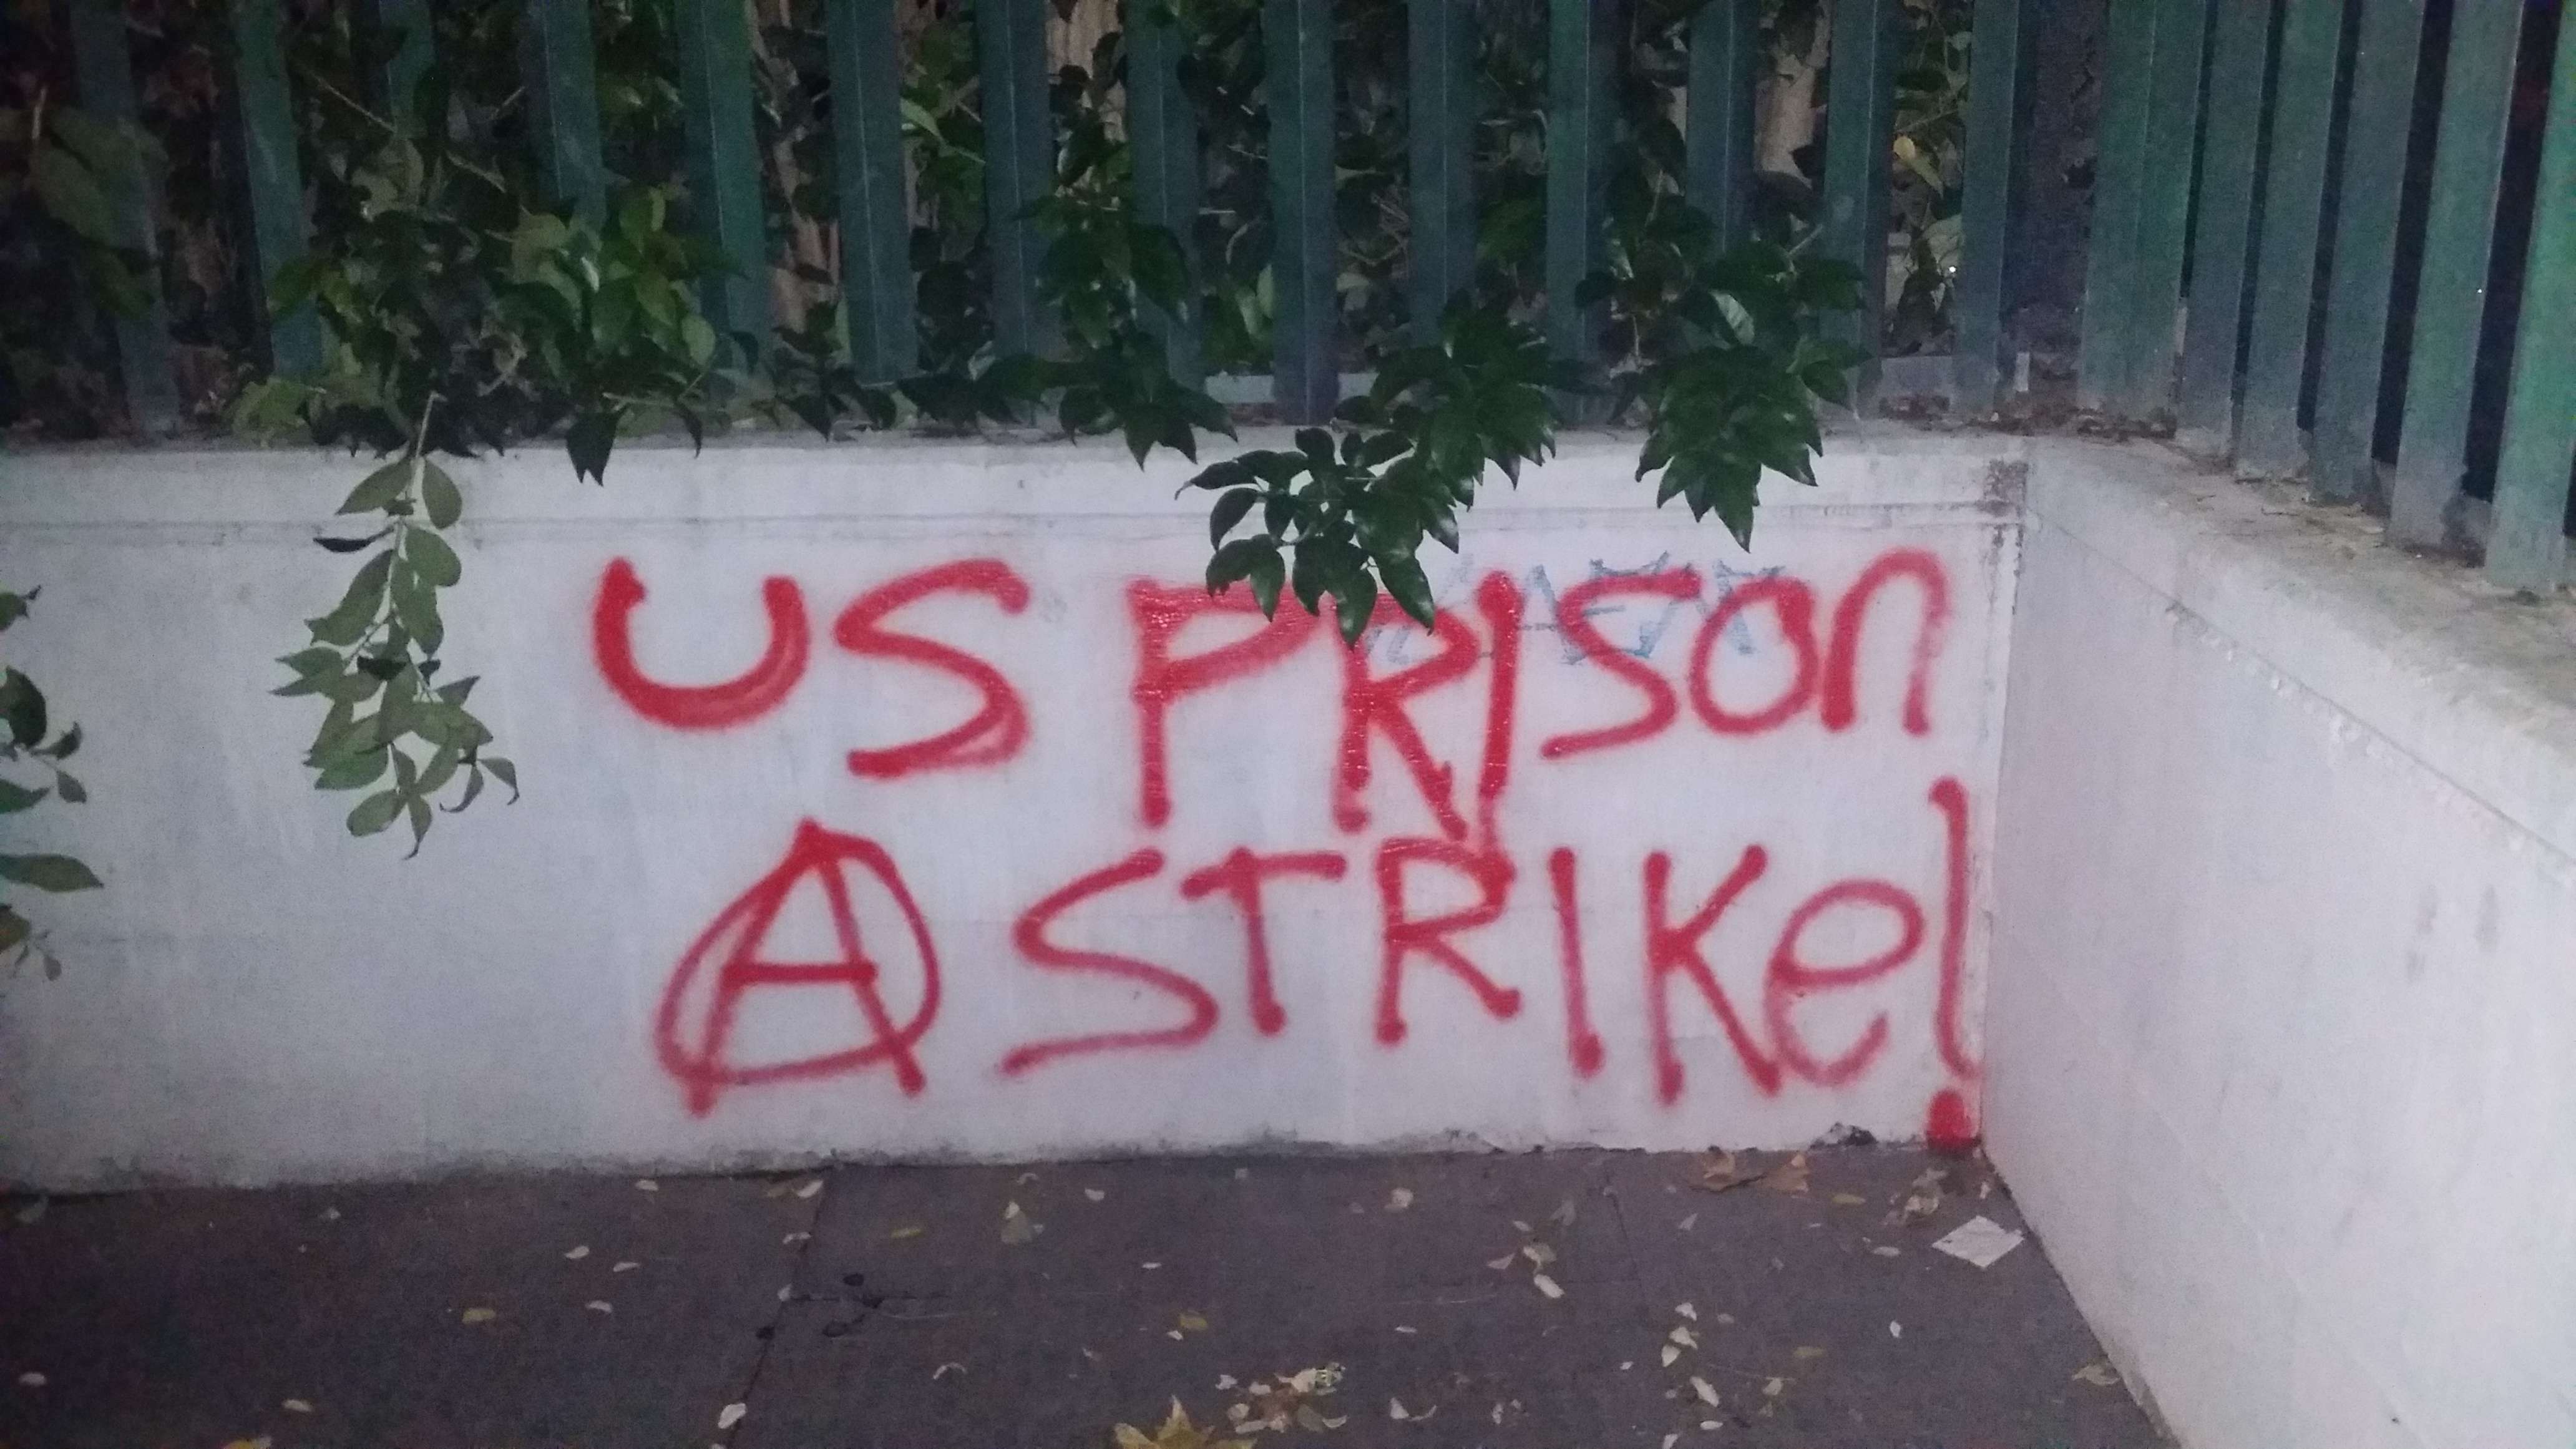 Rome, Italy: Graffiti in solidarity with the US Prison Strike